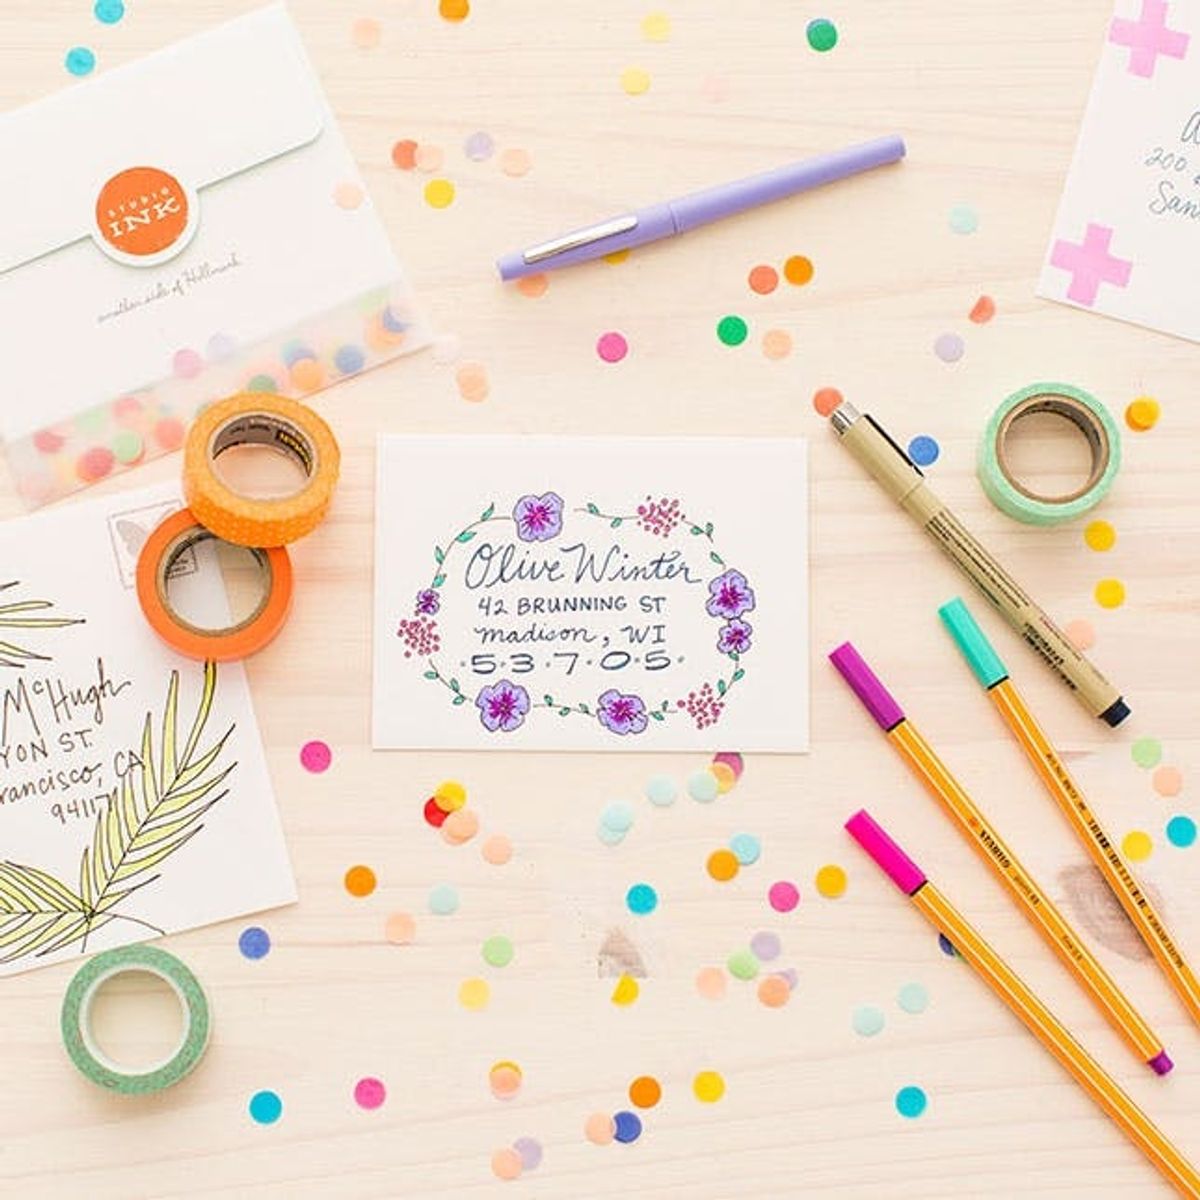 Bring Your Address Book for Snail Mail Goodness — Hallmark’s Got the Stamp Covered